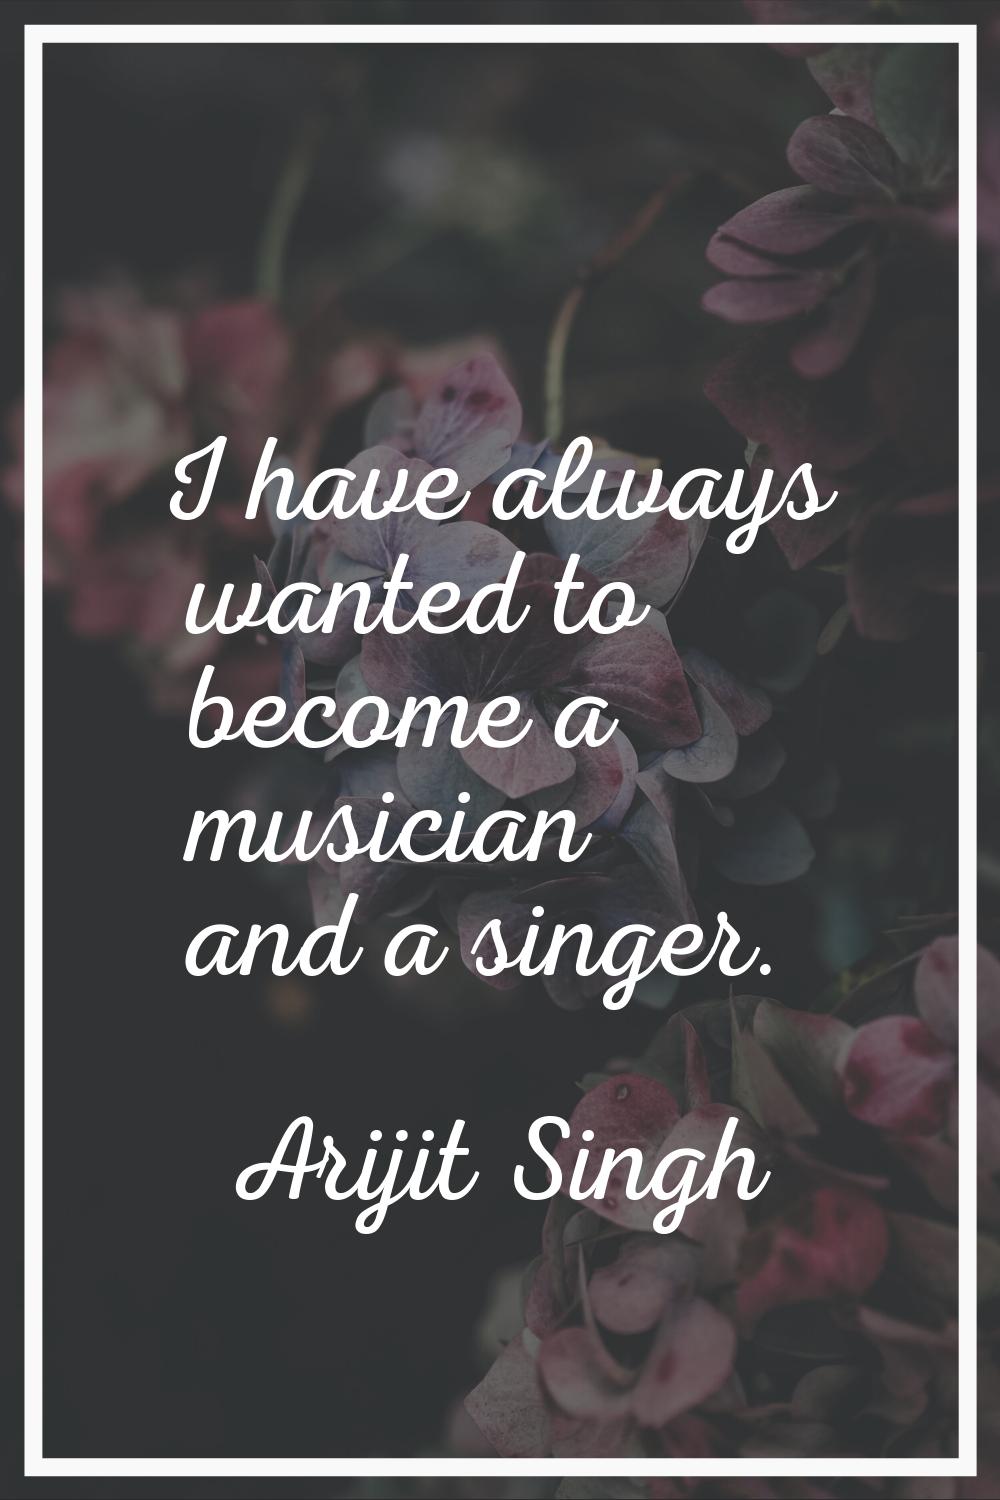 I have always wanted to become a musician and a singer.